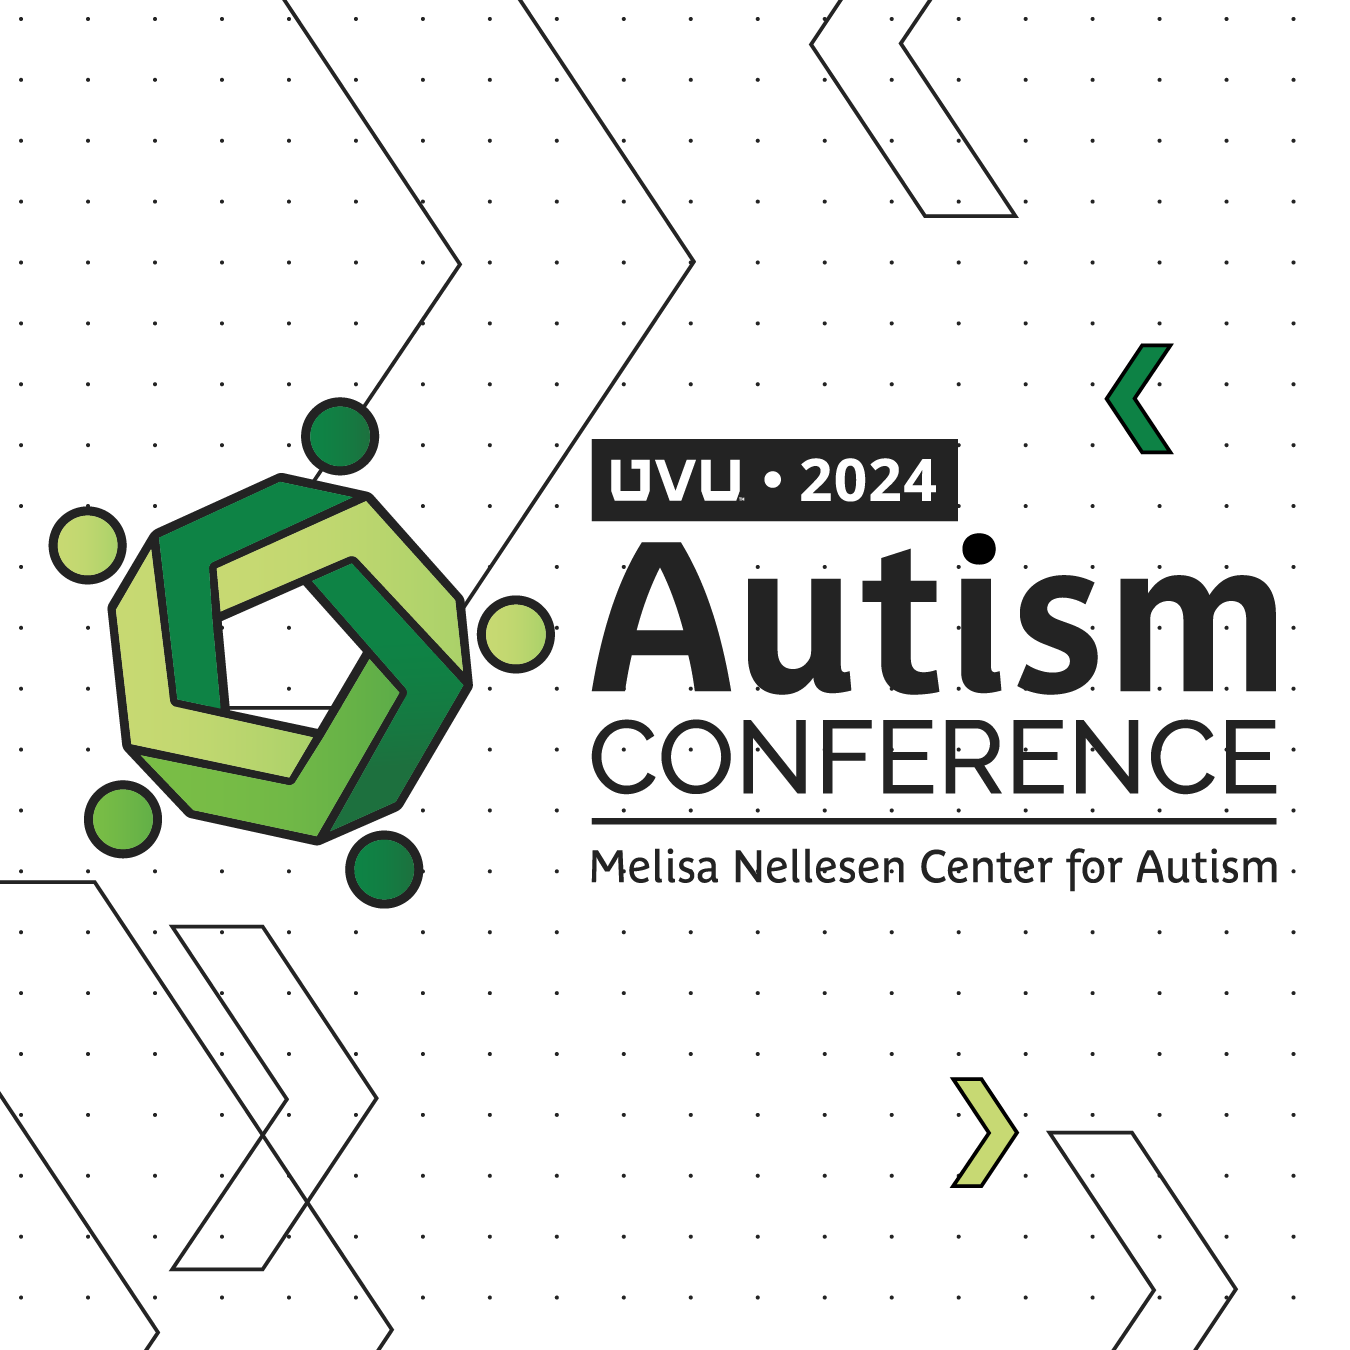 Autism Conference